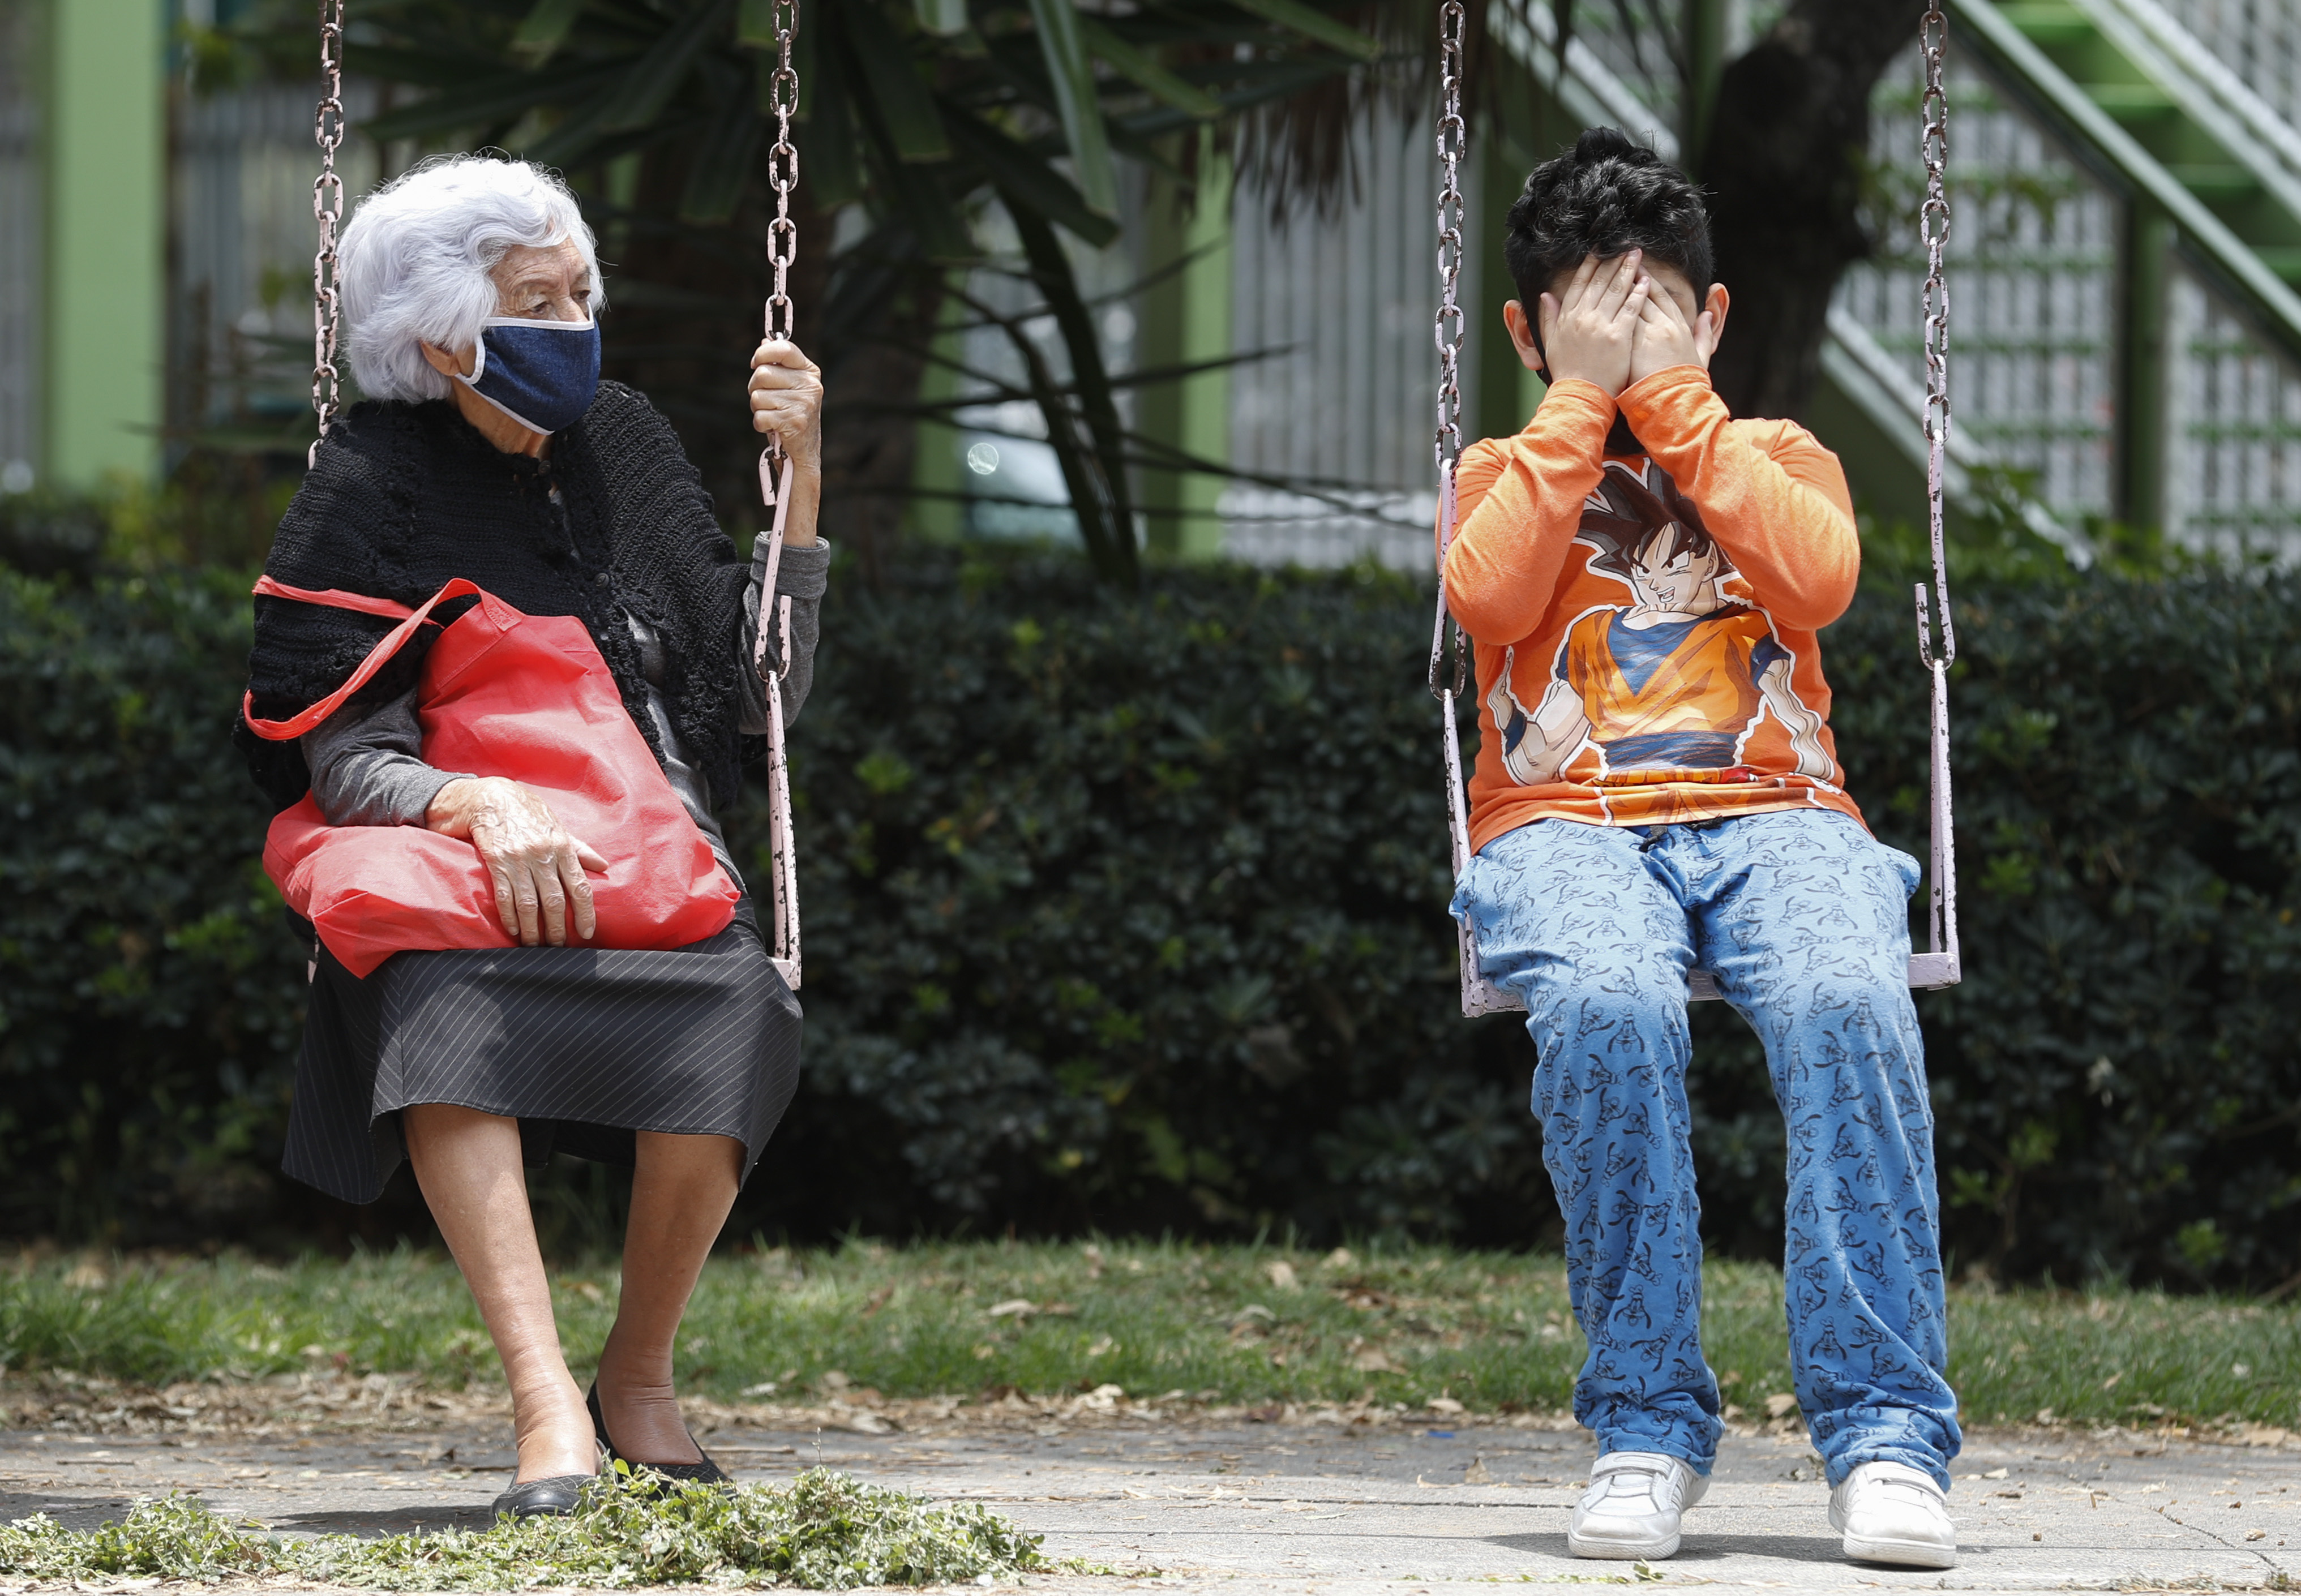 A woman and boy sit on a set of swings as they wait for the all-clear to return to their apartment, after an earthquake in Mexico City, Tuesday, June 23, 2020. The earthquake struck near the Huatulco resort in southern Mexico on Tuesday morning, swayed buildings in Mexico City and sent thousands fleeing into the streets. (AP Photo/Eduardo Verdugo)